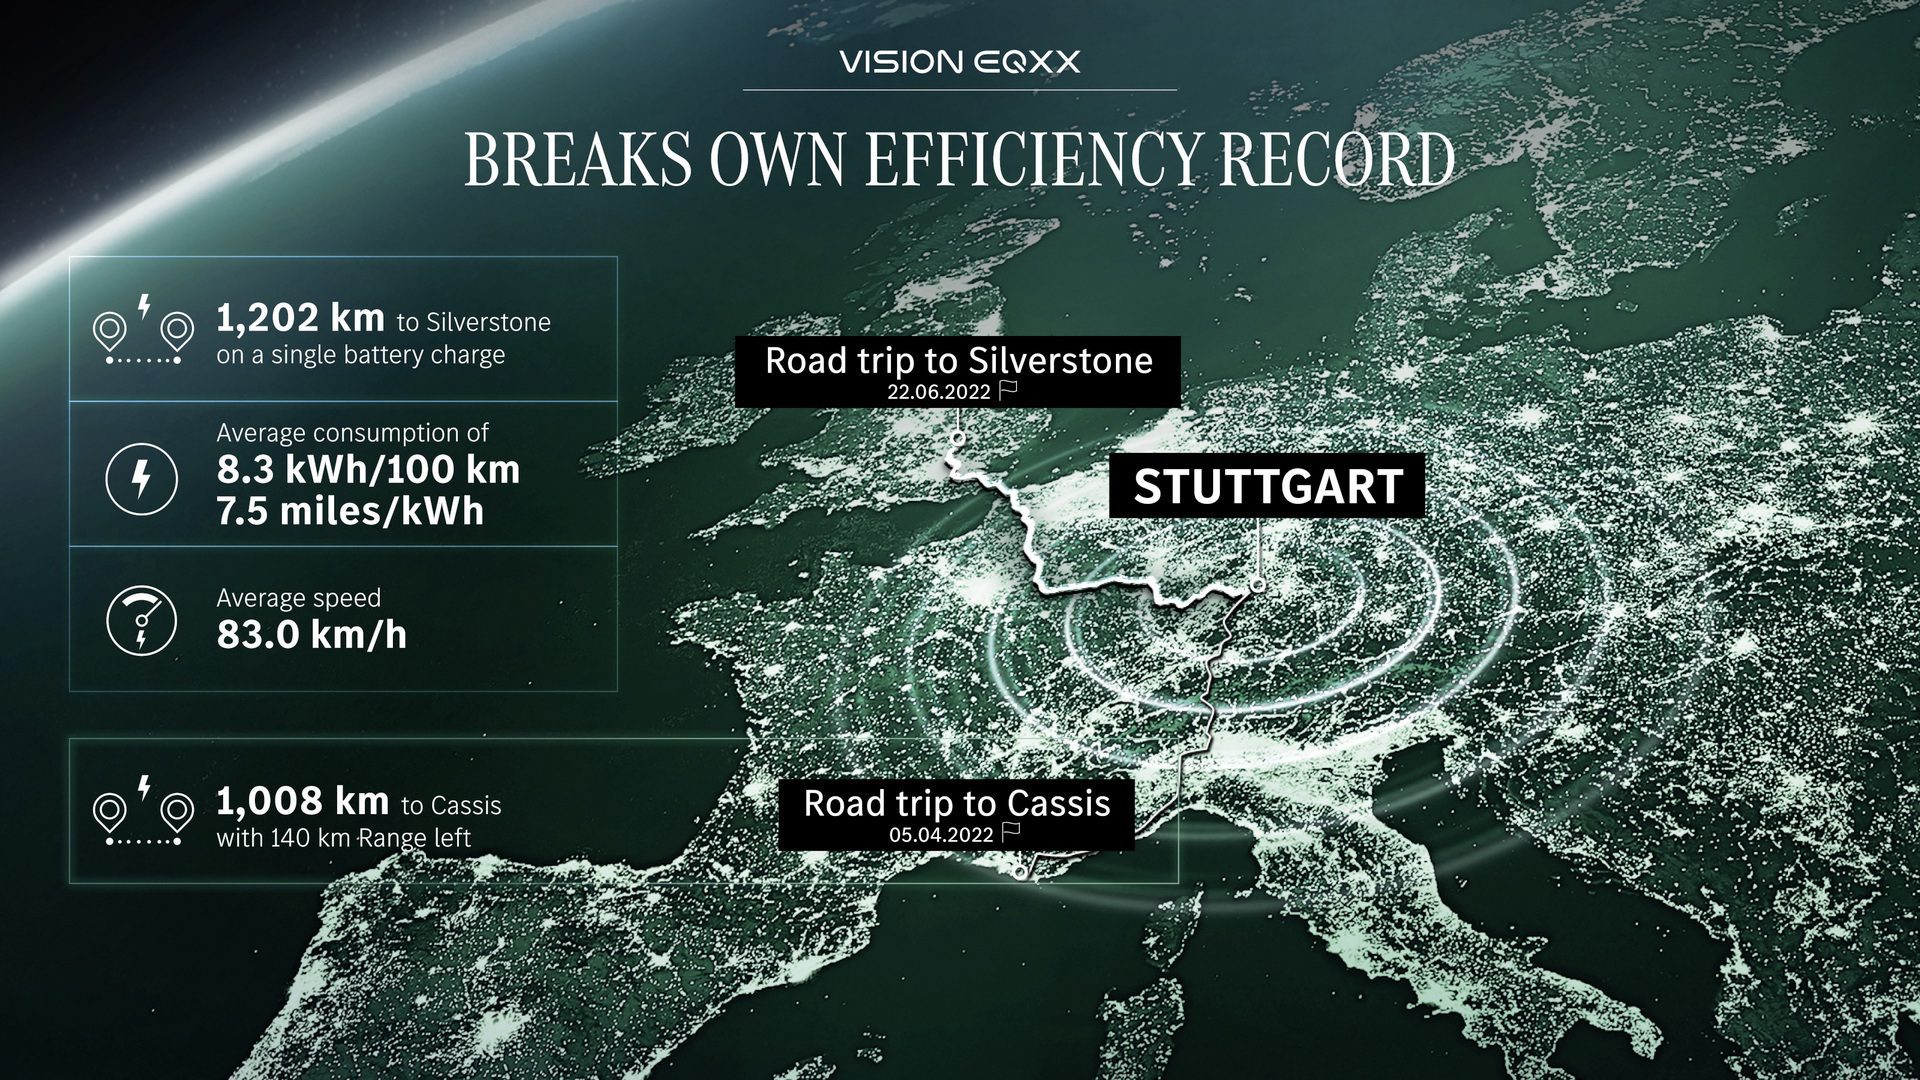 Infographic showing efficiency record set by Mercedes-Benz VISION EQXX